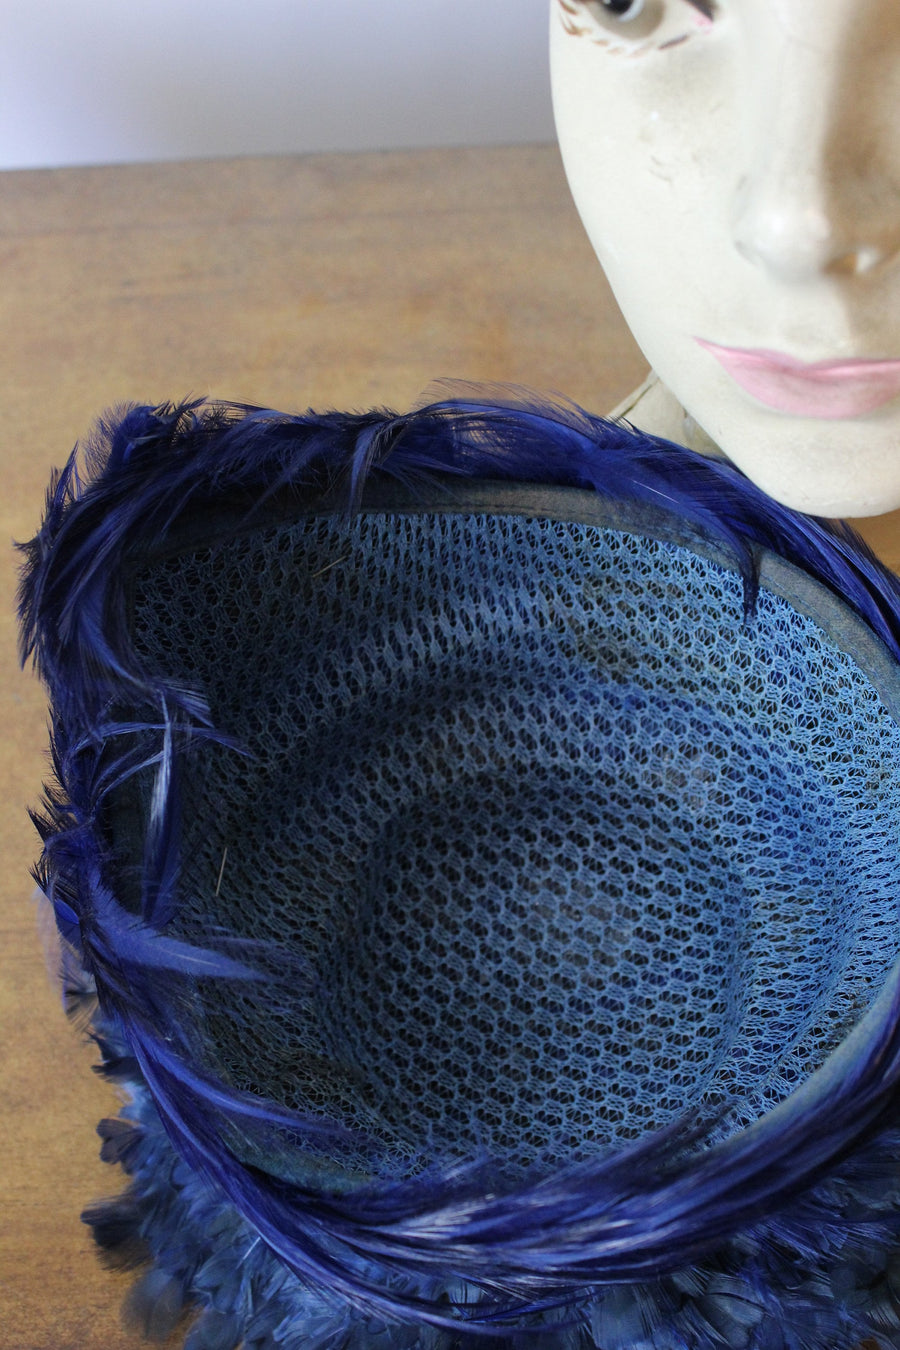 1950s BLUE feather STRUCTURED cap hat | new fall